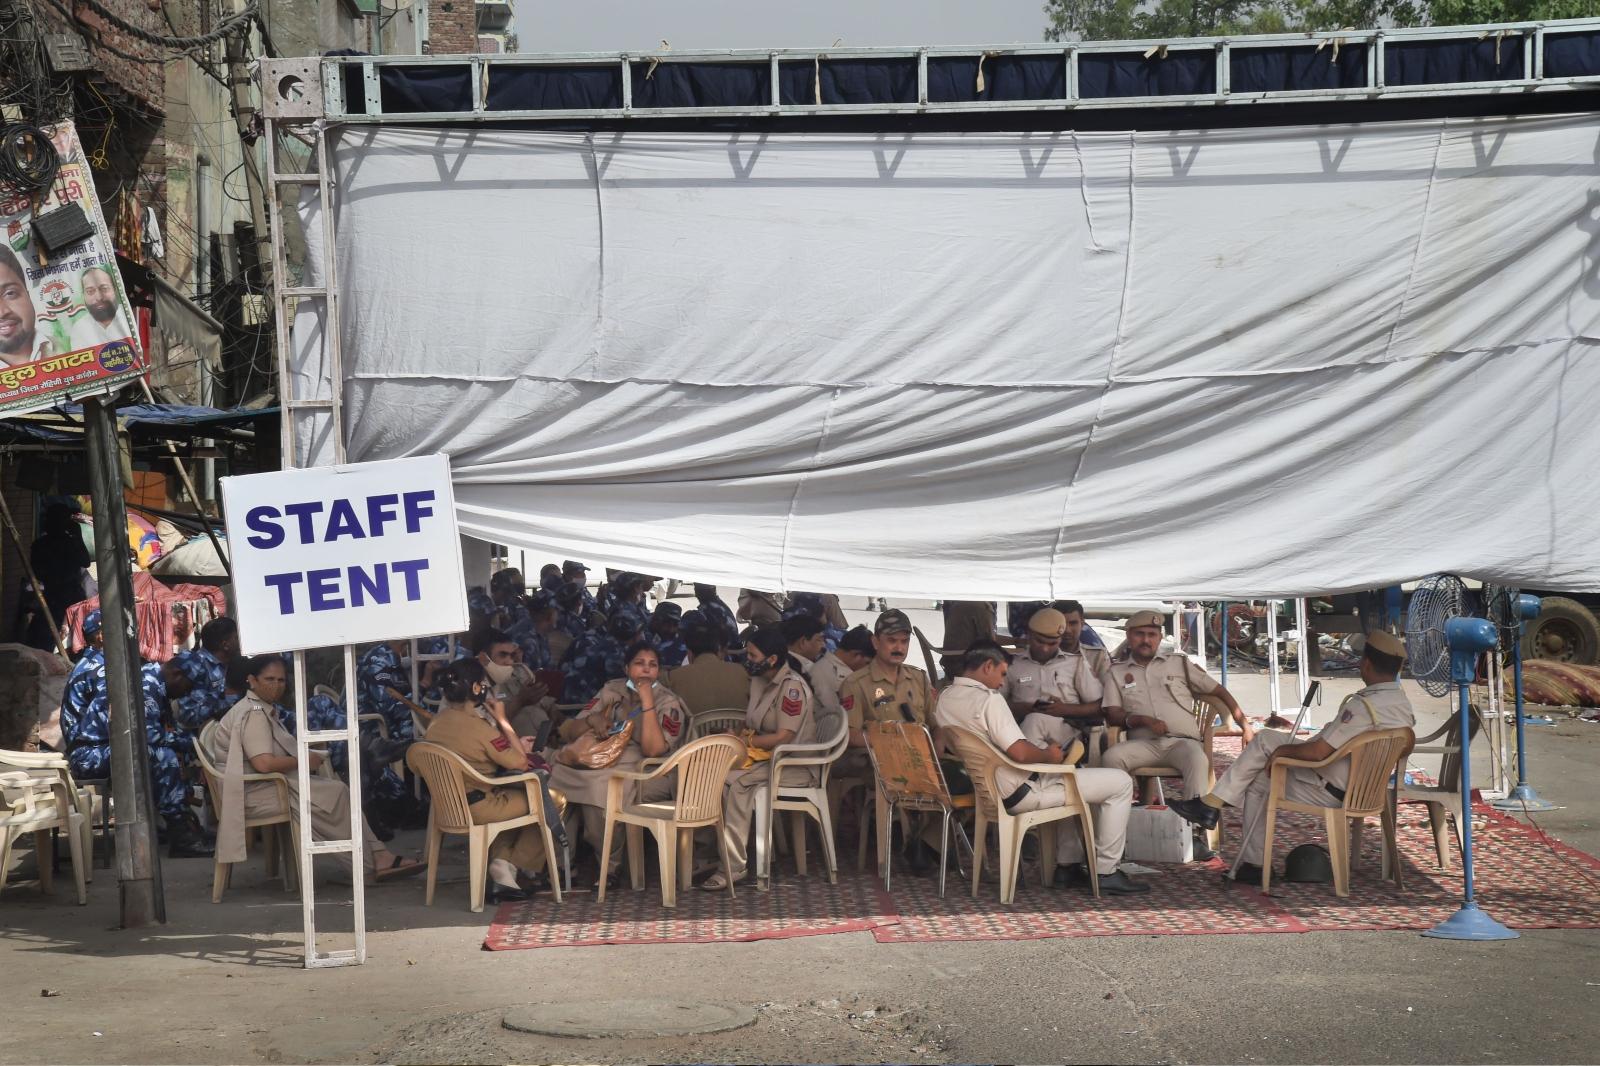 Over 500 police personnel and six companies of additional force have been deployed in the area round the clock